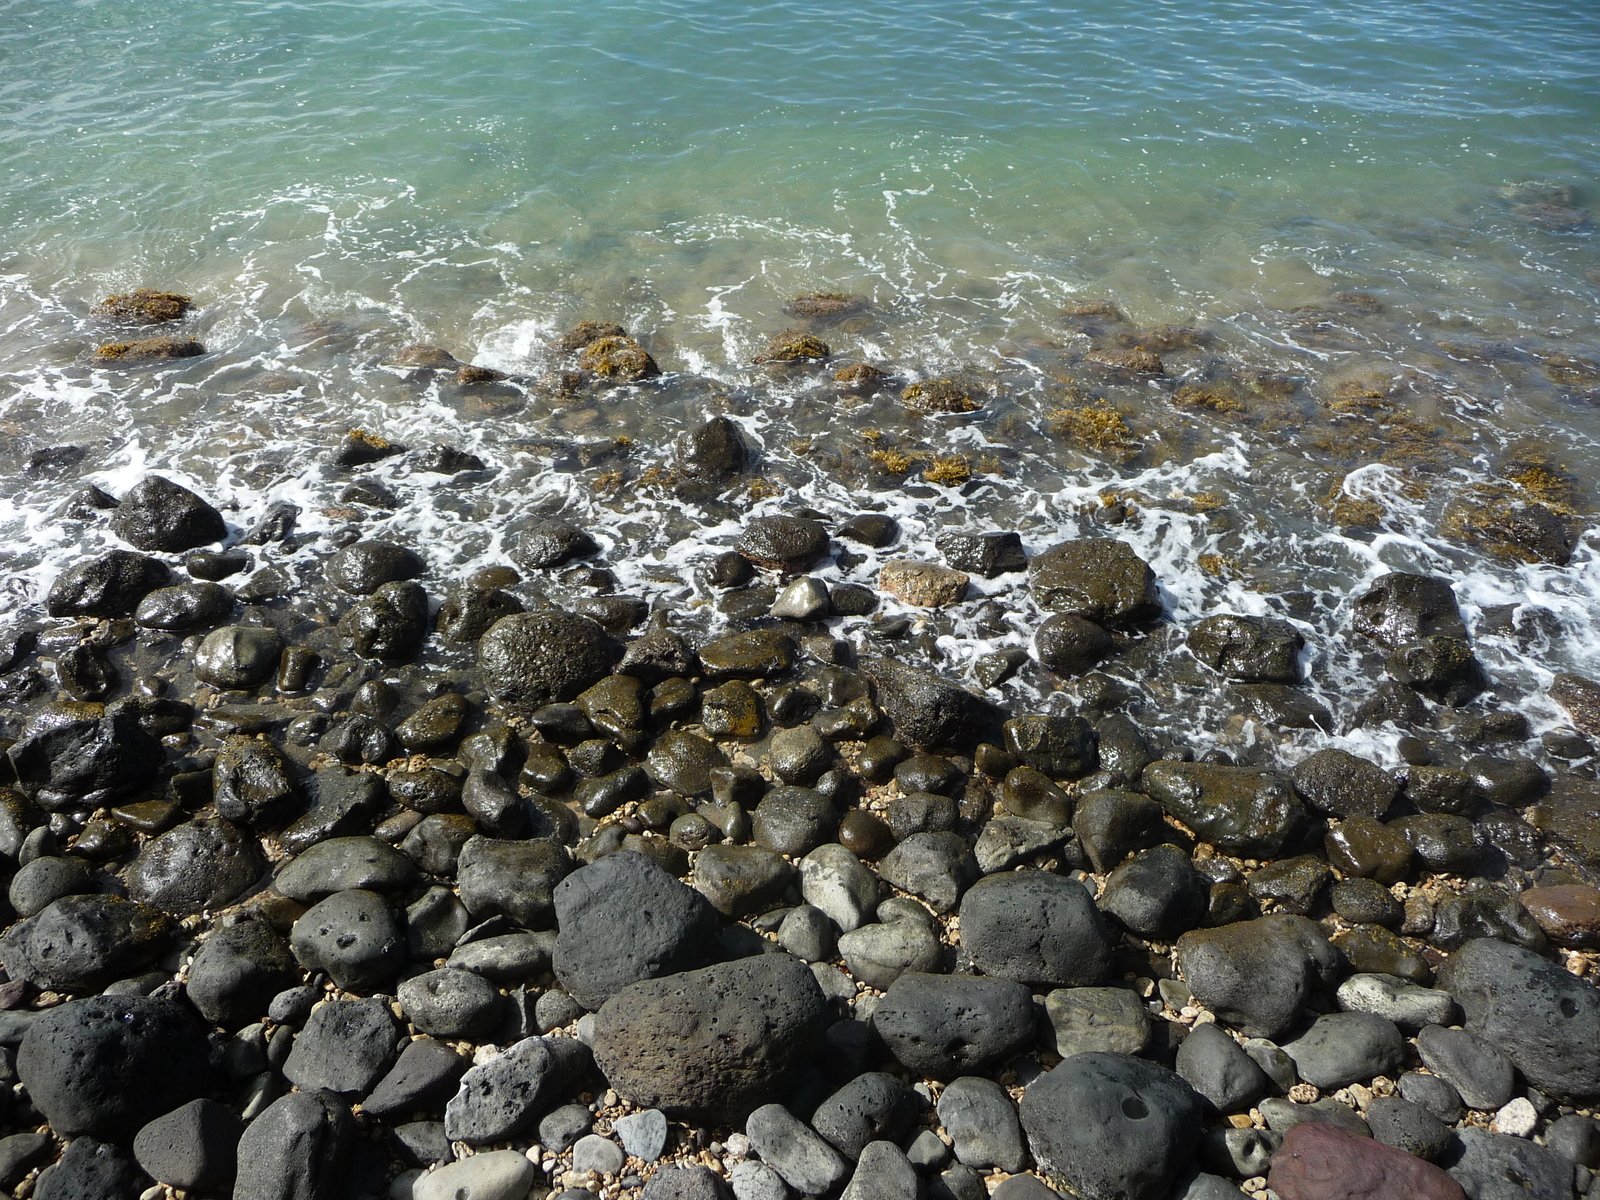 the rocky shore and seaweed are shown from above